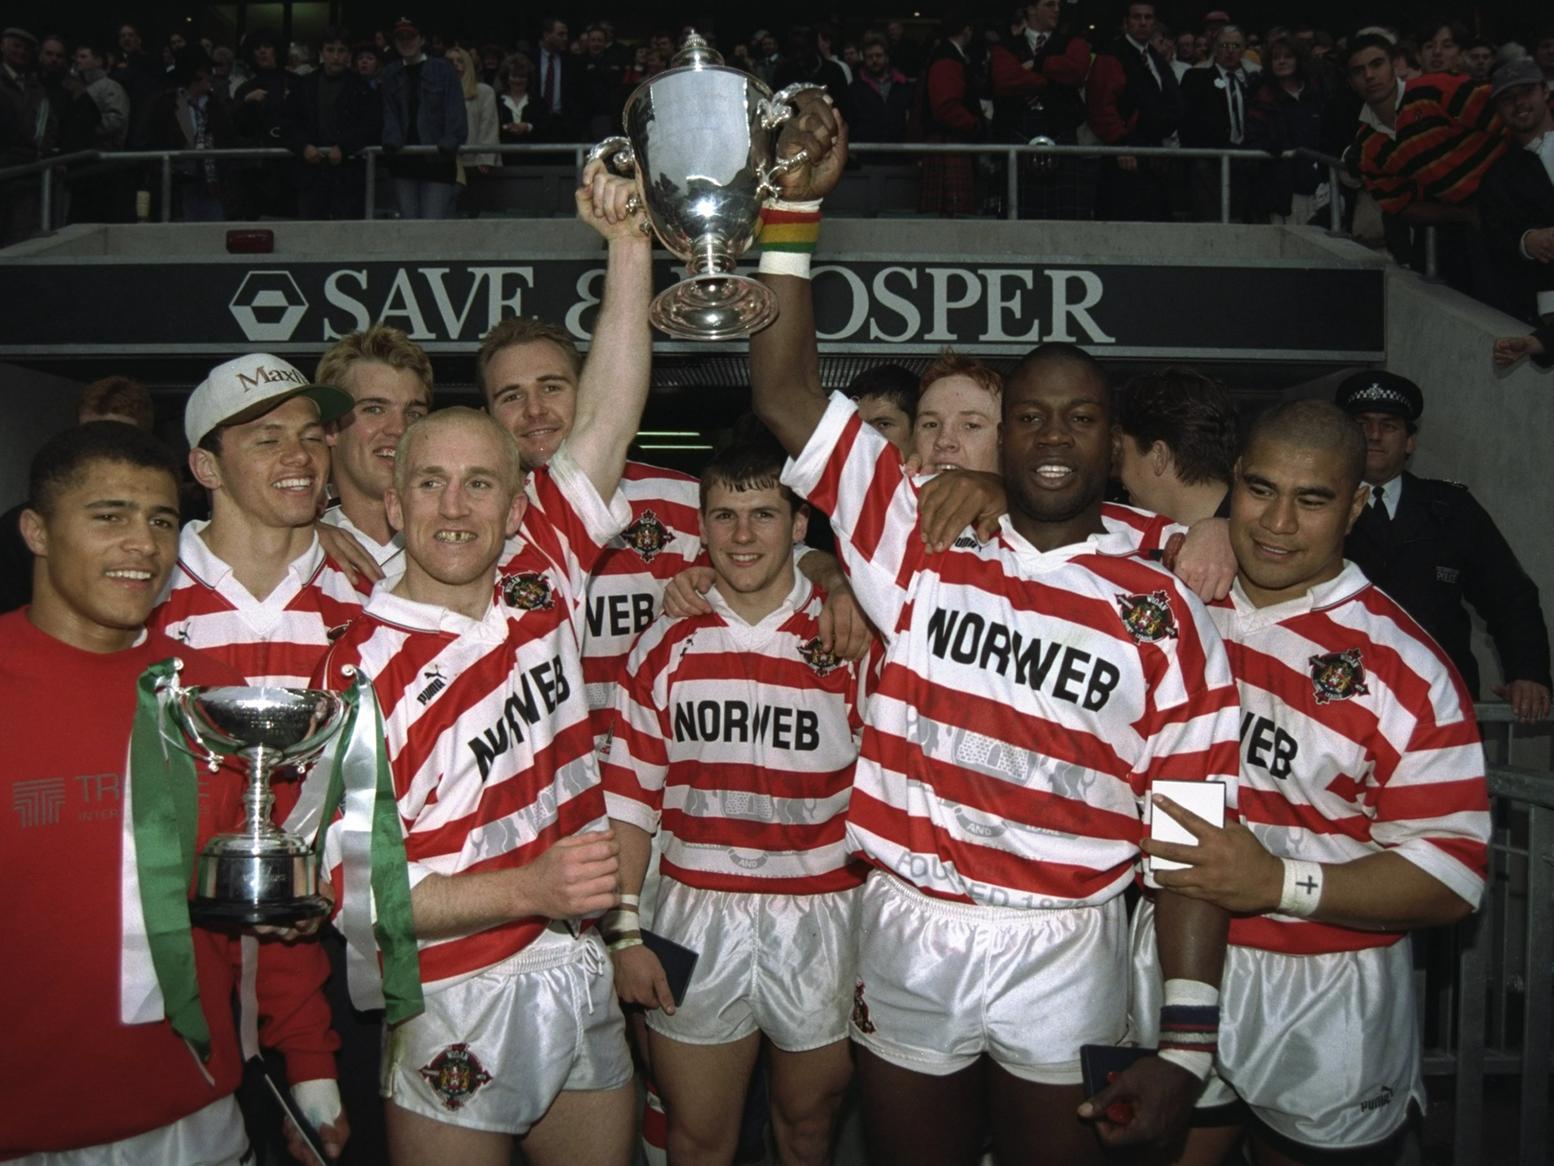 Wigan made history when they became the first rugby league team to enter the Twickenham Sevens in 1996. And they marked the occasion by claiming victory.